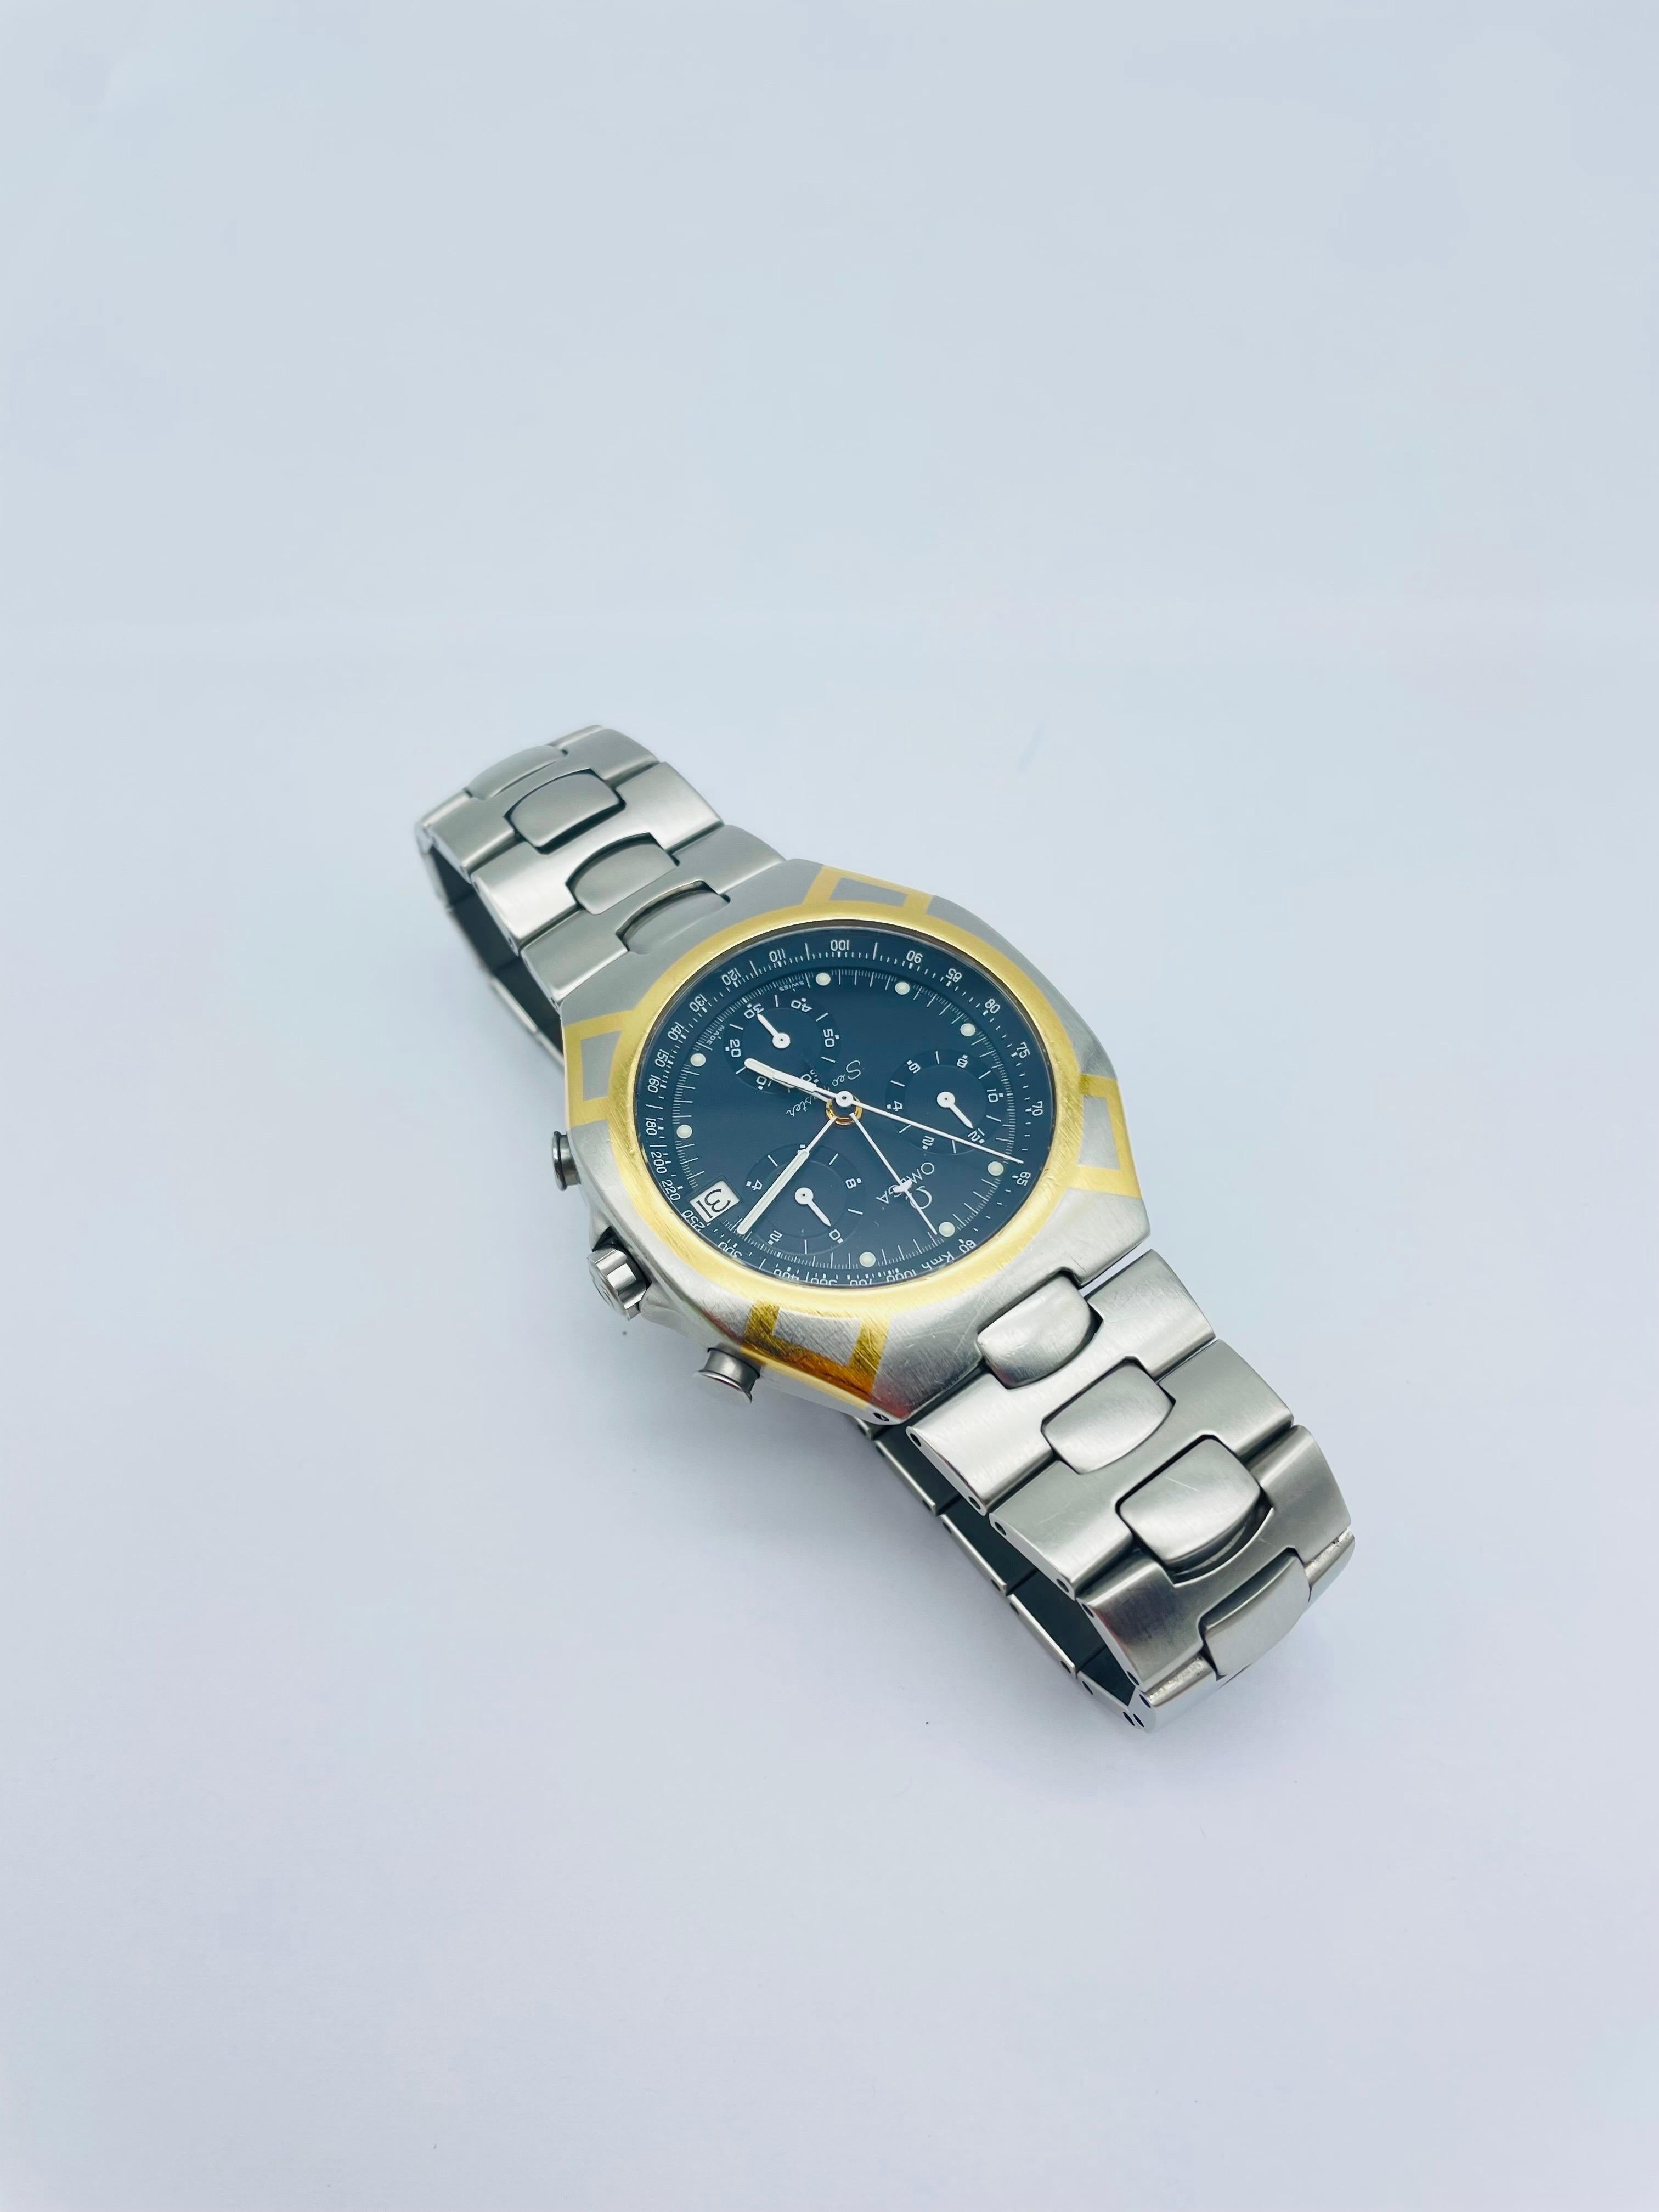 The OMEGA Seamaster Polaris Chronograph Quartz Men's Watch Steel/Gold is a true masterpiece of watchmaking. With its striking design and exceptional features, this watch is perfect for any man who values both style and function.

Crafted by the